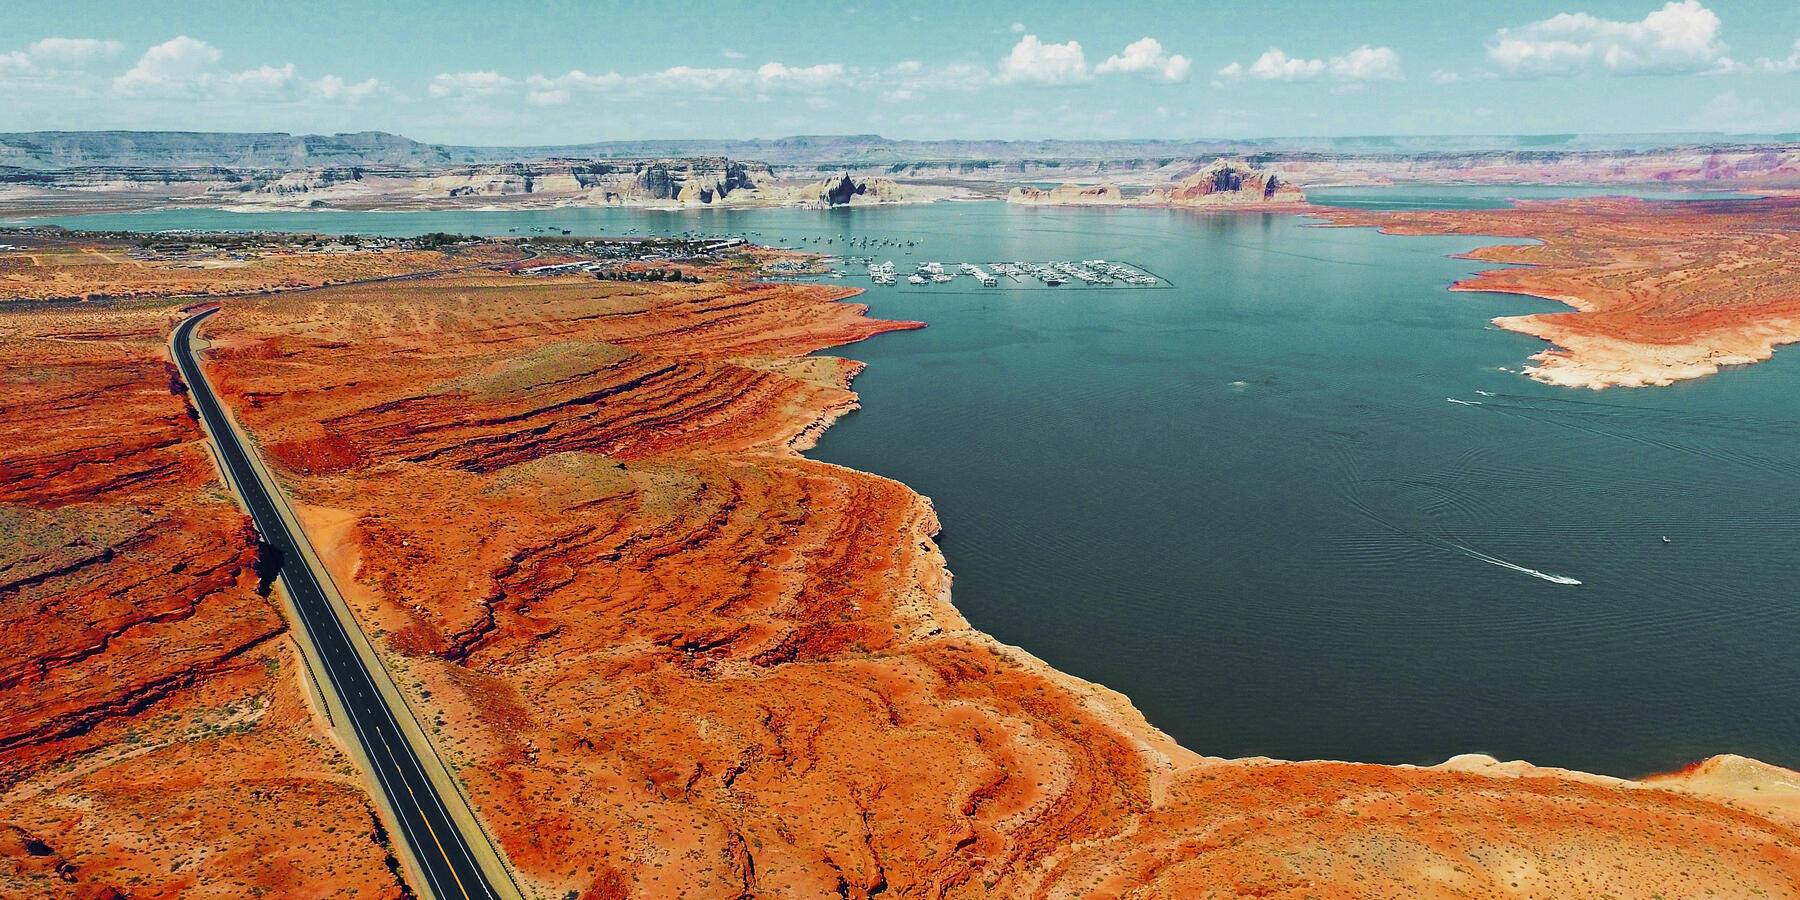 A large blue reservoir lake surrounded by red rock formations and a long road running alongside it glimmers in the sunlight. A marina shows in the far distance with blue skies and clouds.